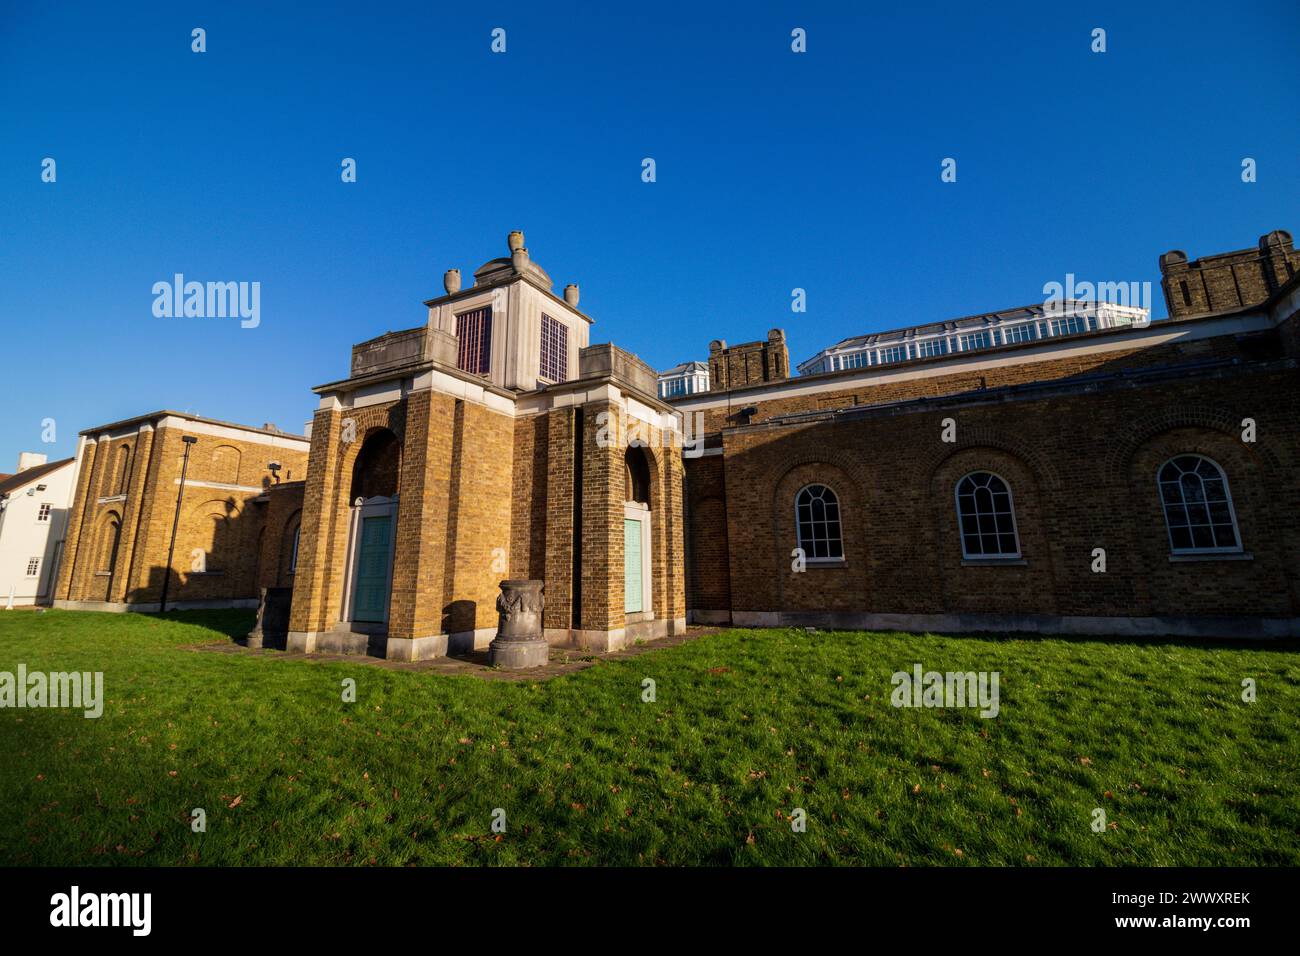 Dulwich Picture Gallery Stockfoto